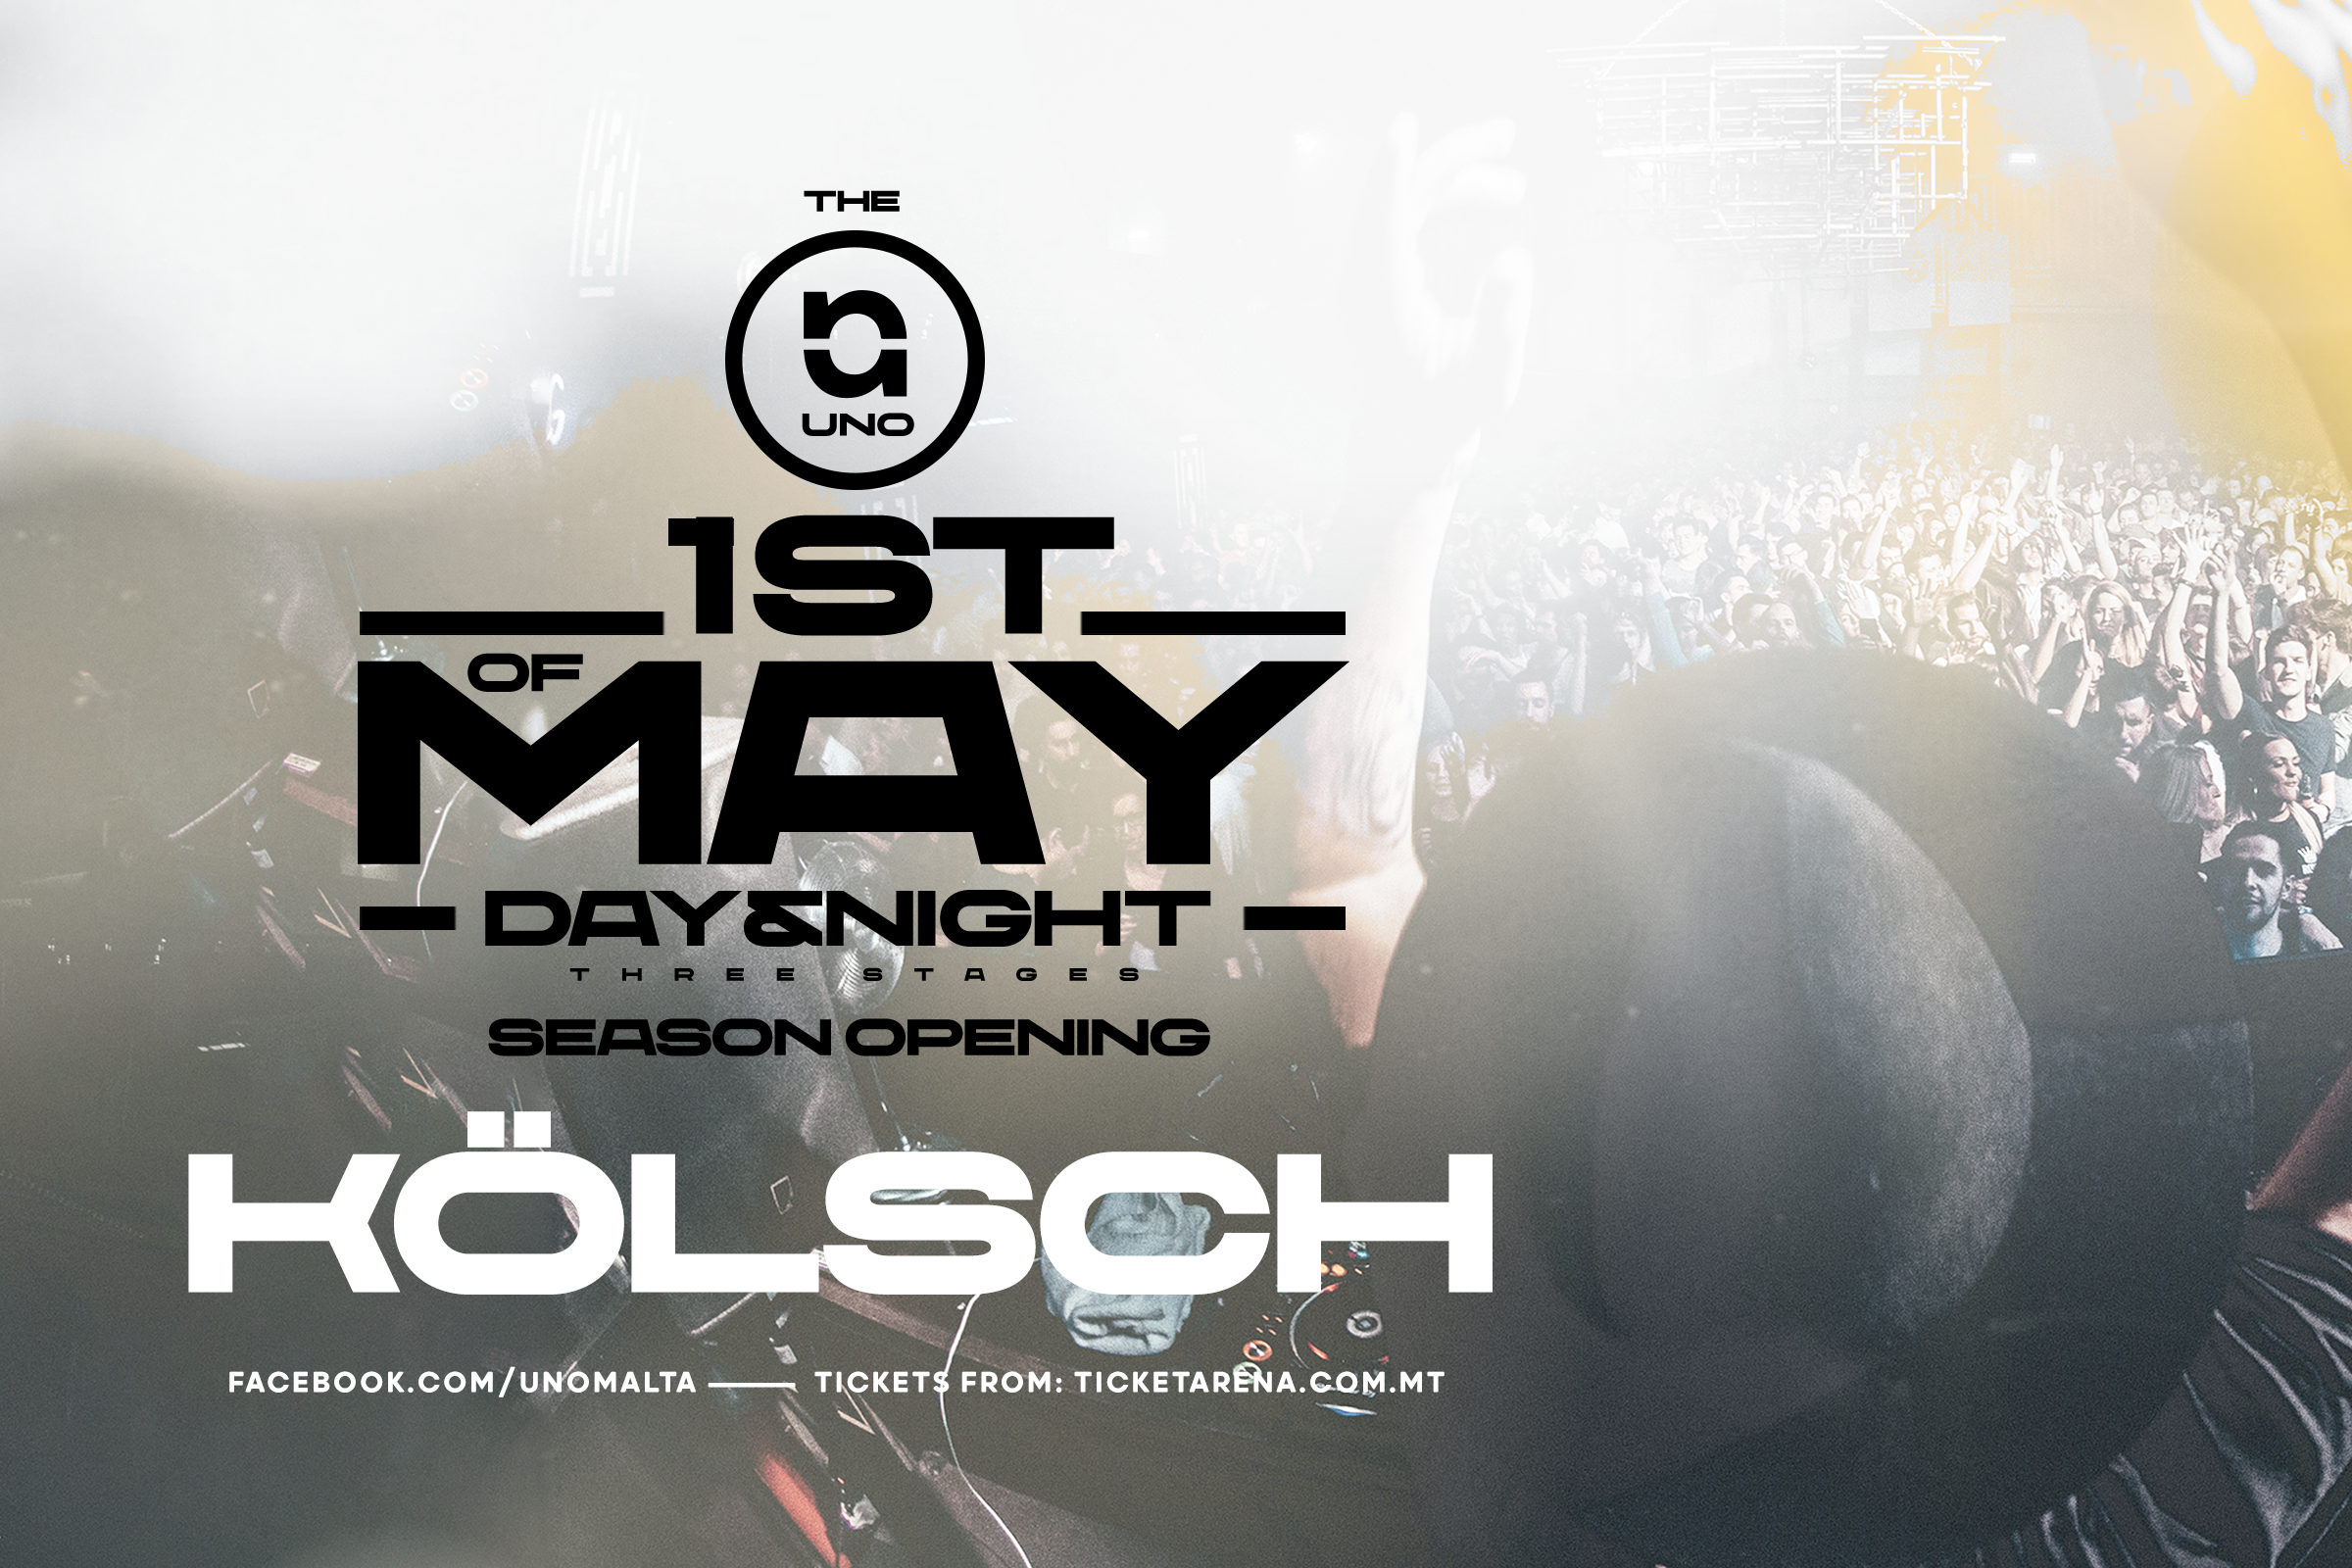 1st of May - Day & Night with KÖLSCH at Uno - フライヤー裏